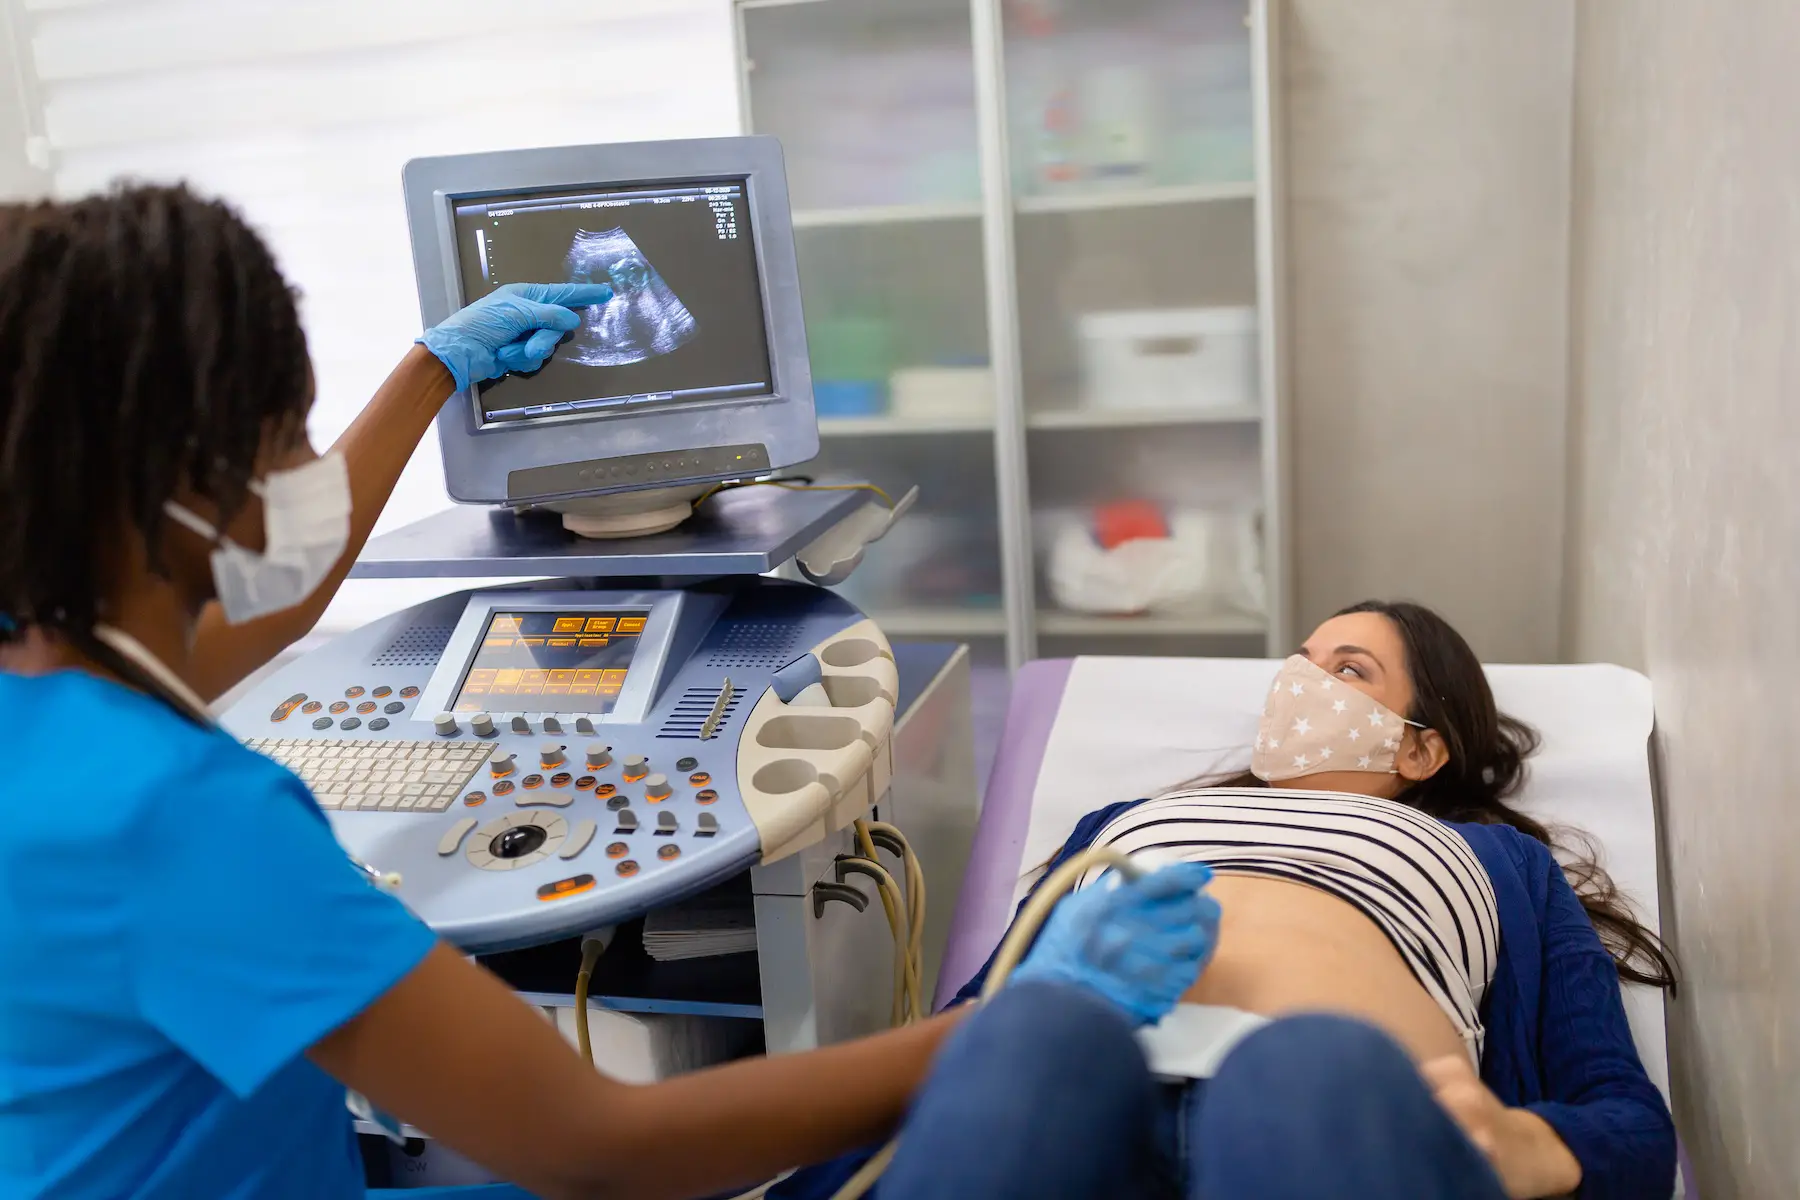 A female technician doing an ultrasound examination of a pregnant woman who is lying back on the exam table